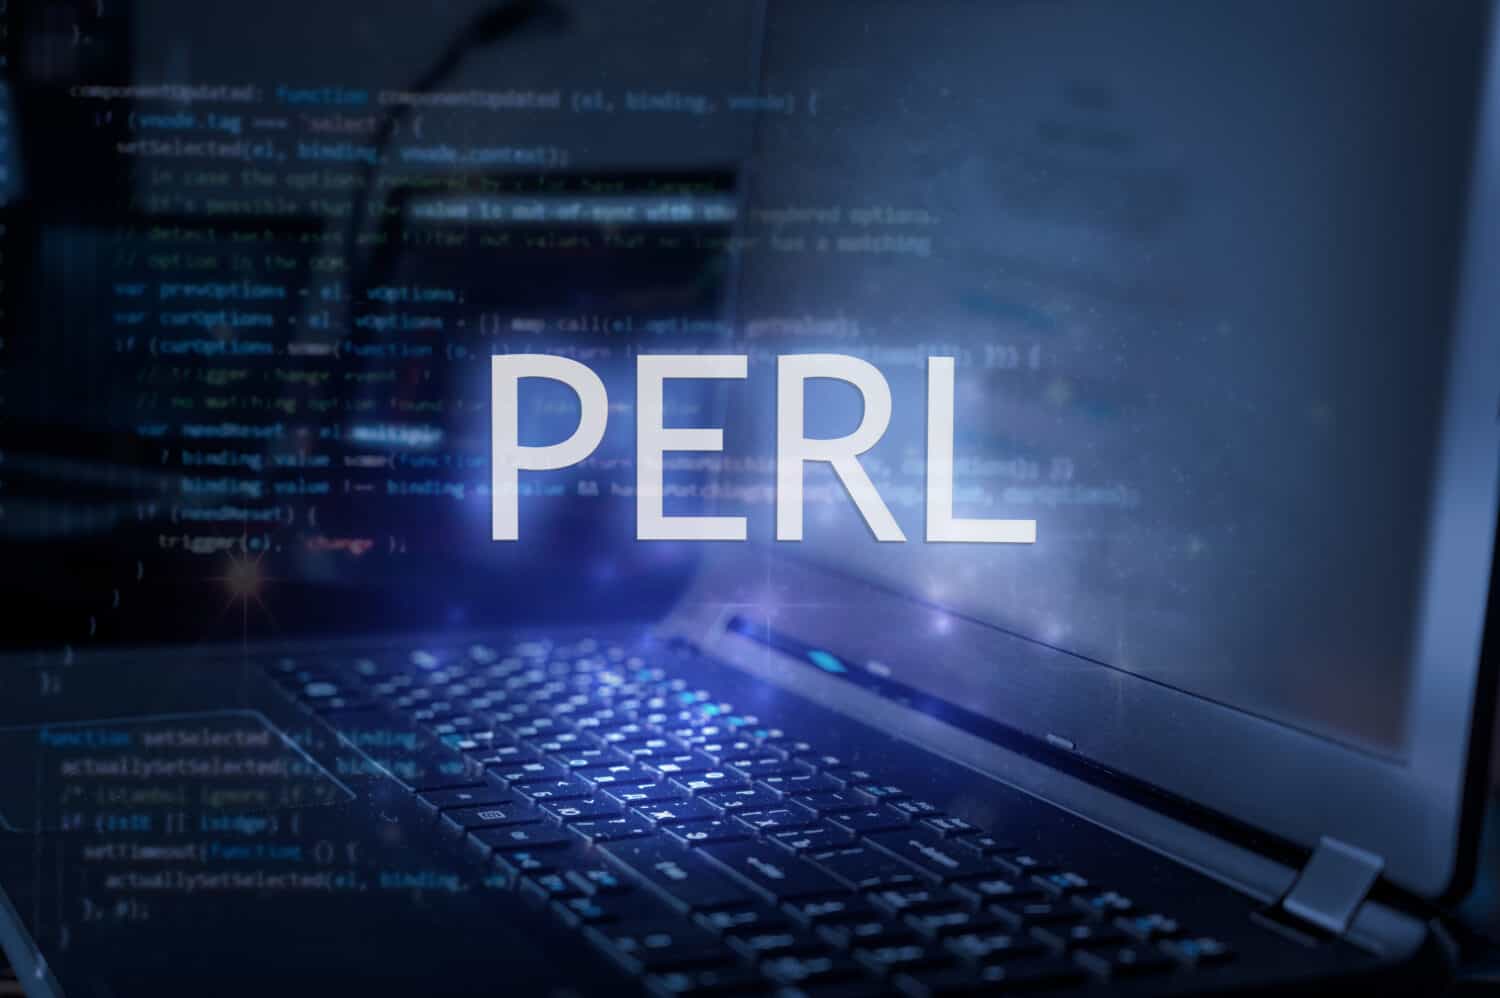 Perl inscription against laptop and code background. Learn perl programming language, computer courses, training. 